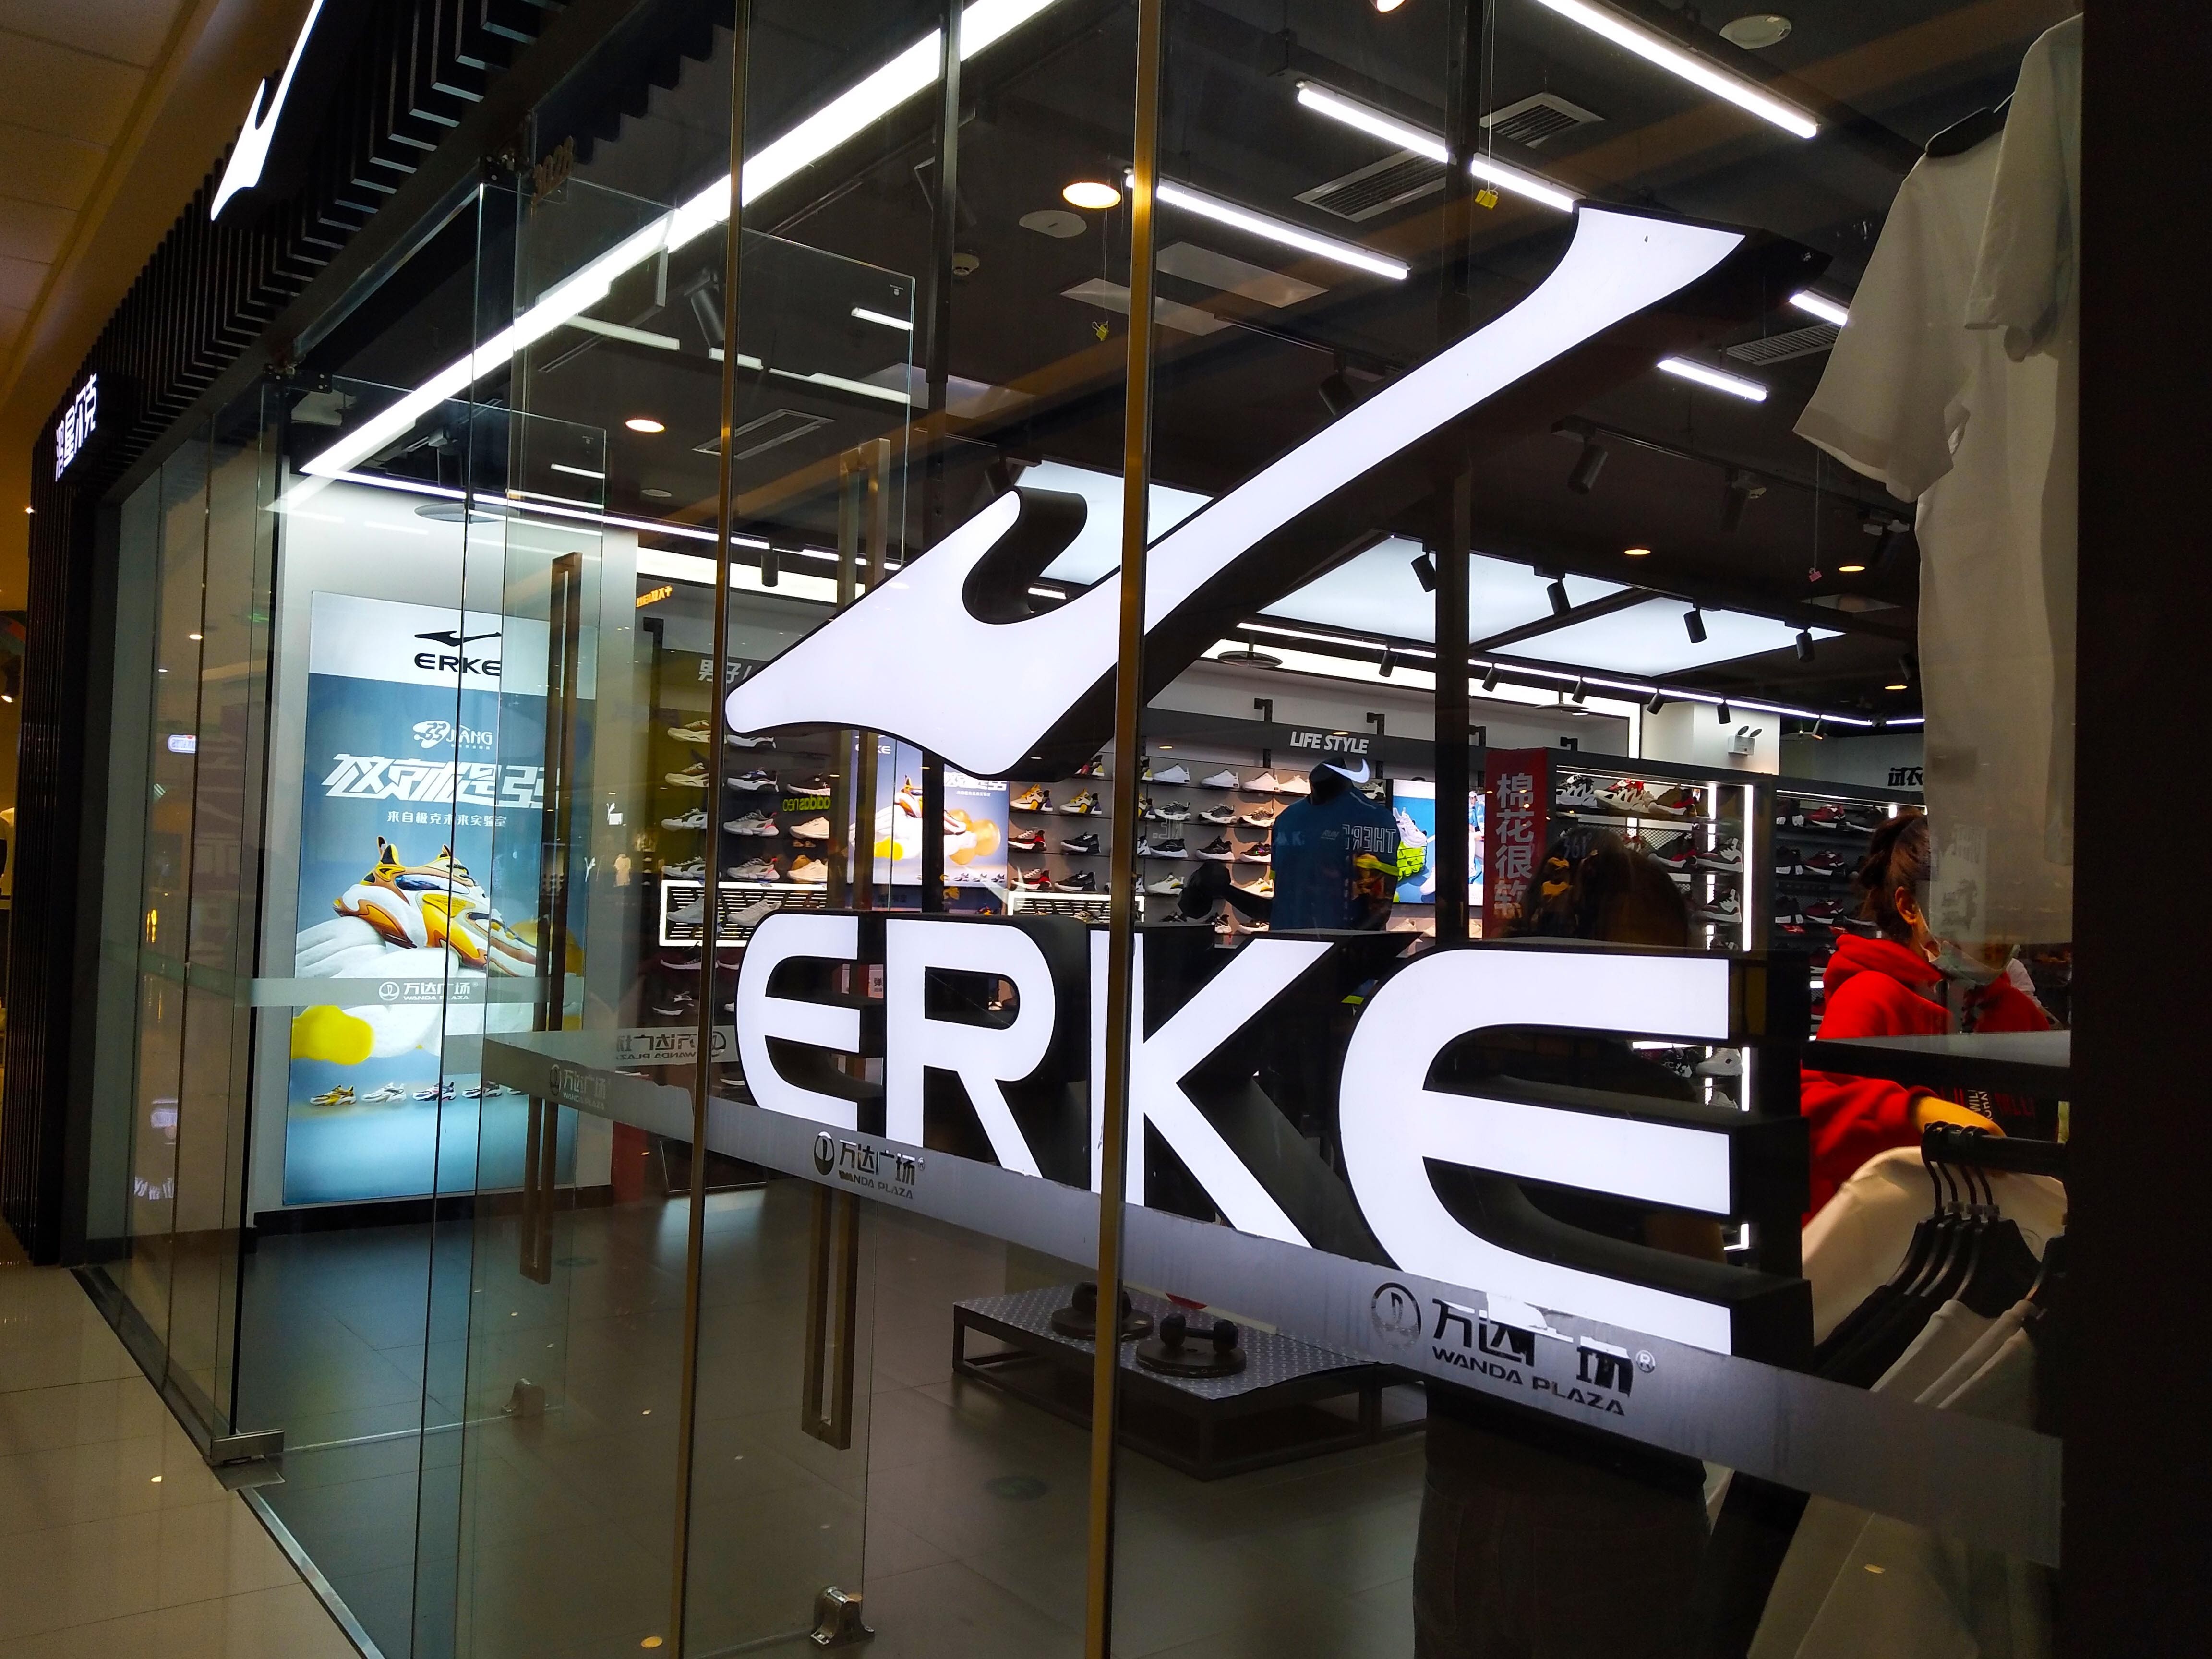 Sales of Erke sportswear soared 52 times to around 6.3 million yuan on an e-commerce platform managed by JD.com on Friday. Photo: VCG via Getty Images